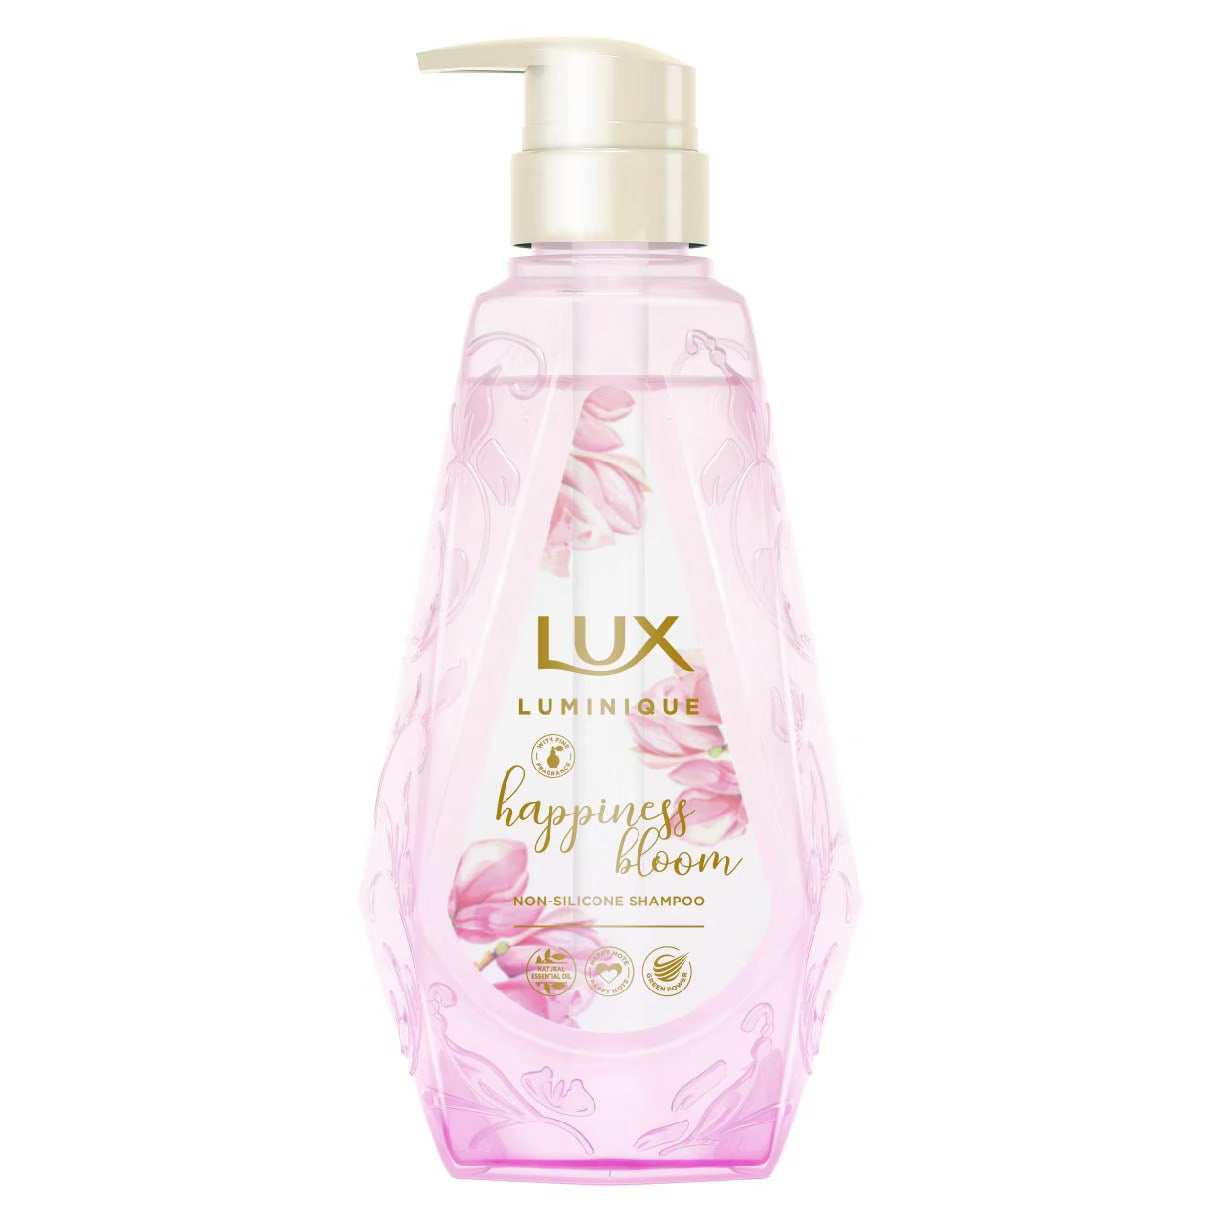 Lux Luminique Shampoo OR Treatment 450ml (Damage Repair / Botanical Pure / Happiness Bloom)